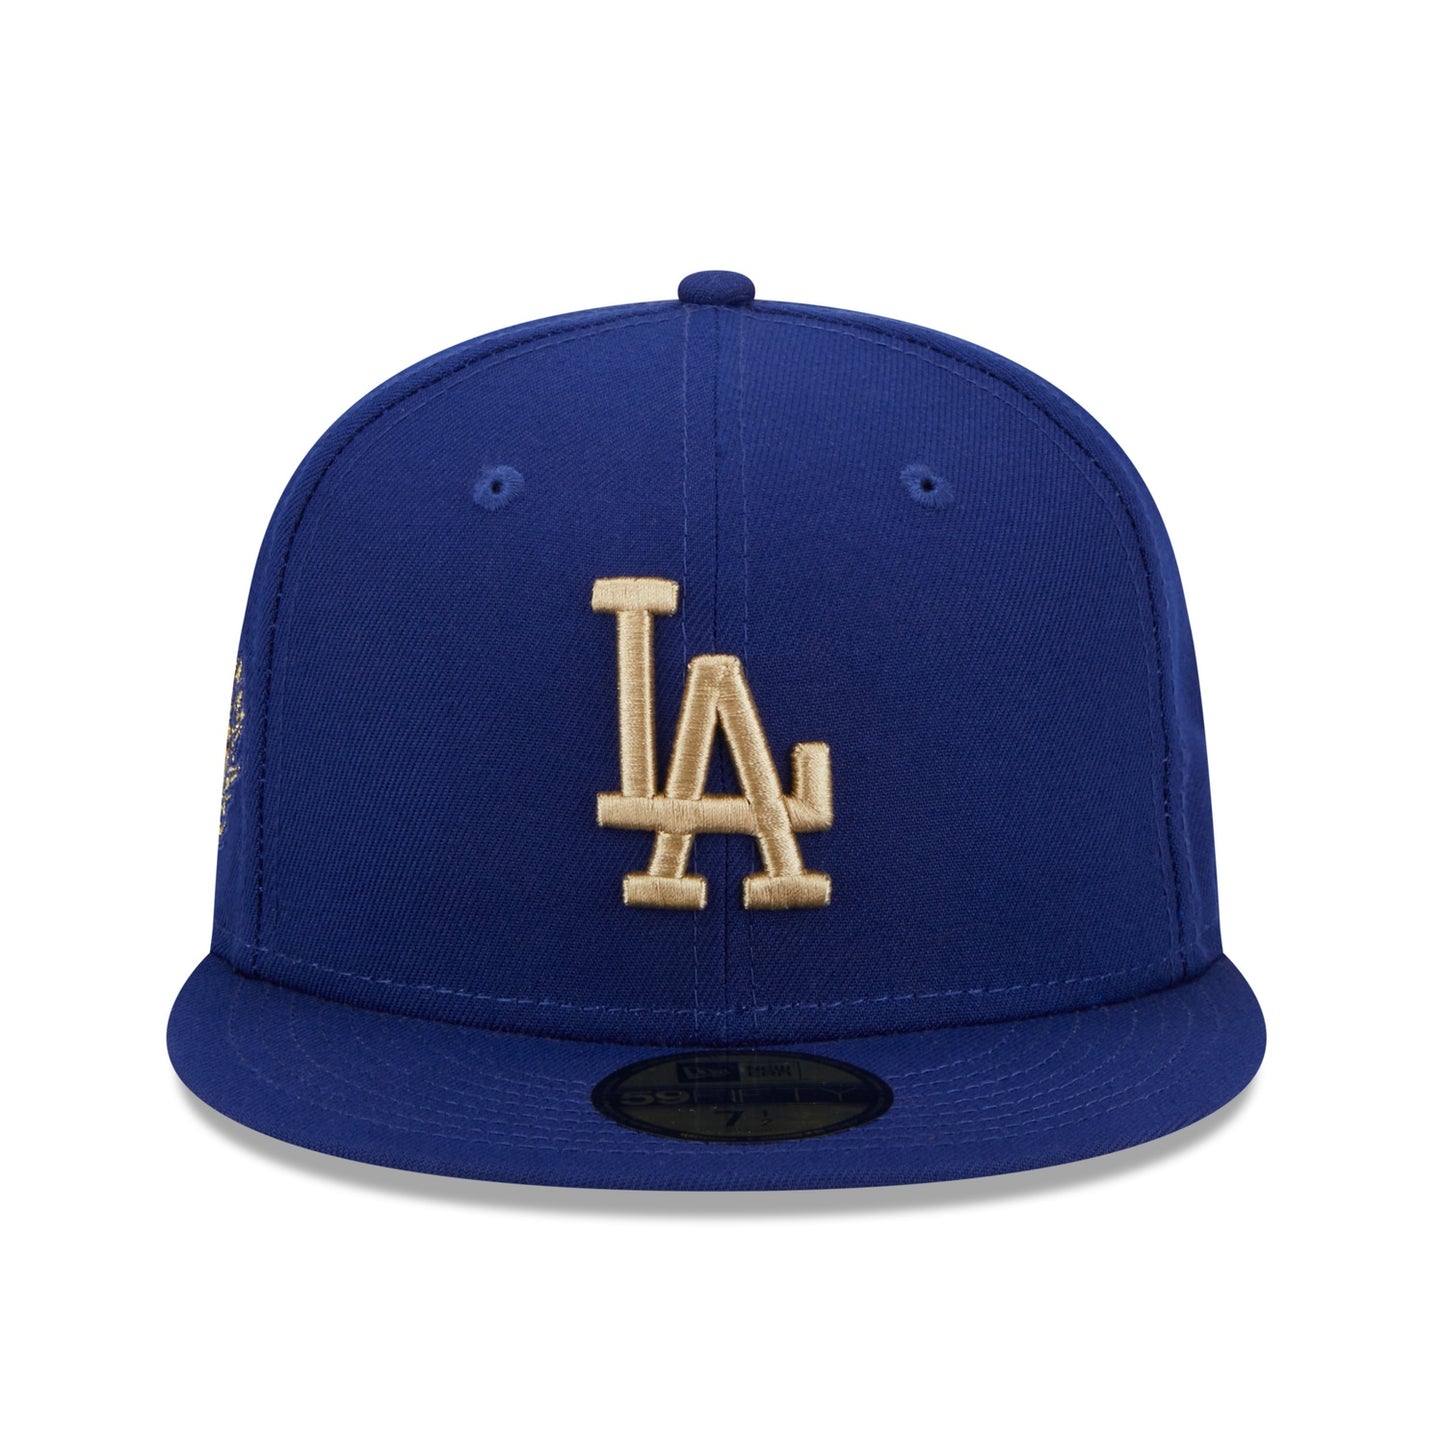 NEW ERA 59FIFTY MLB LOS ANGELES DODGERS WORLD SERIES 1963 BLUE / GREEN UV FITTED CAP